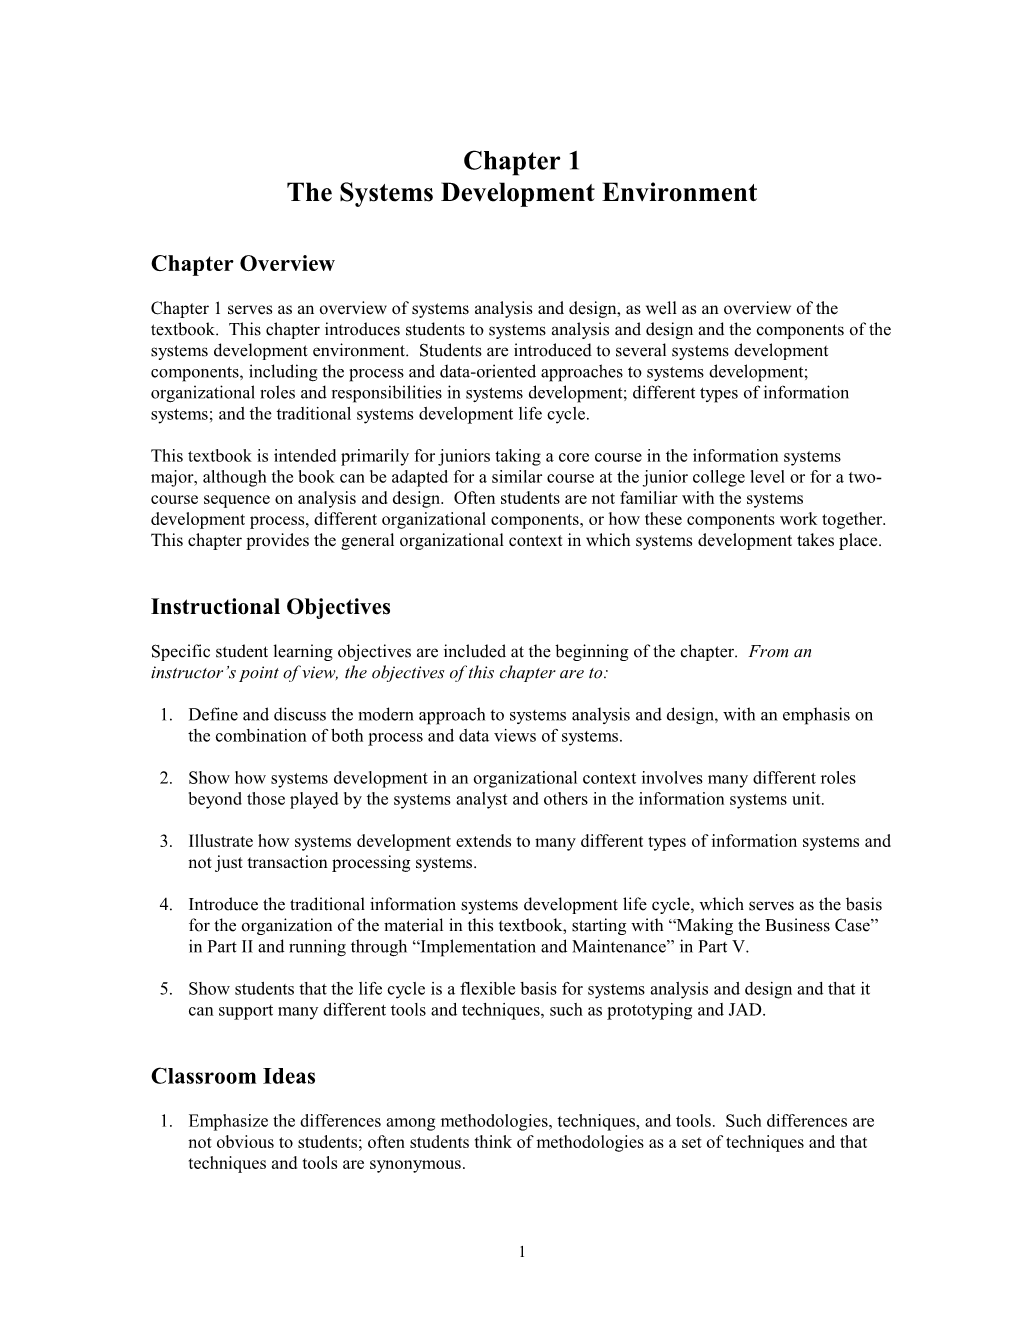 Chapter 1 the Systems Development Environment